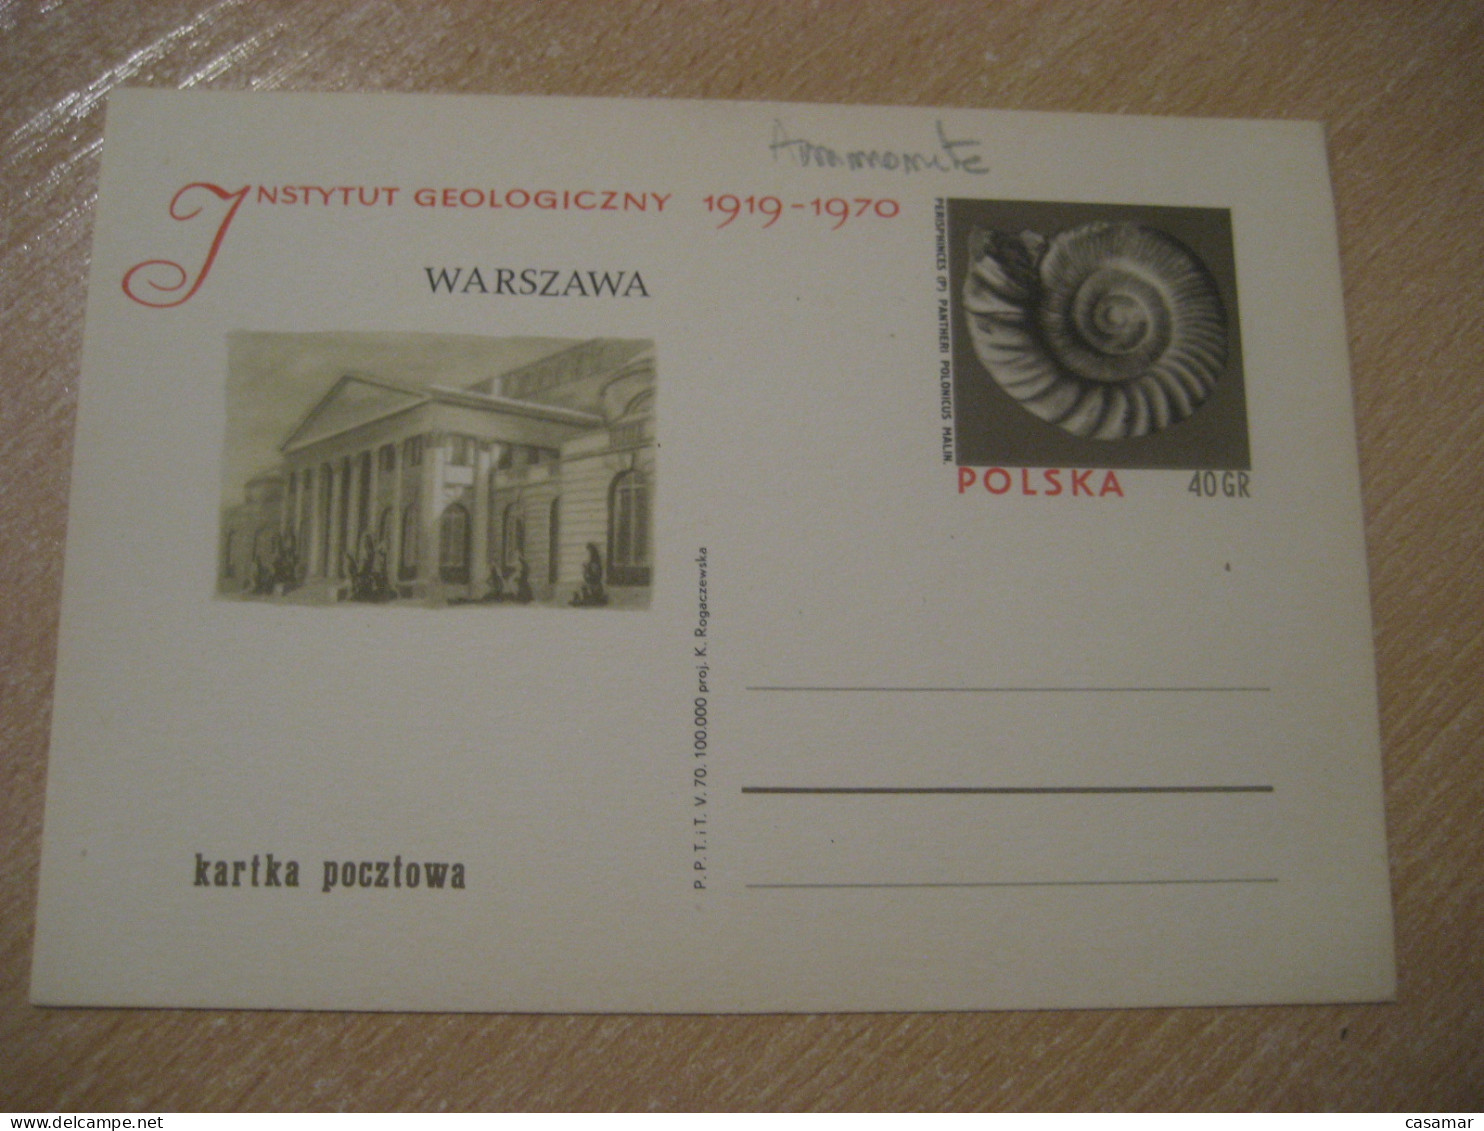 WARSZAWA 1970 Ammonite Postal Stationery Card POLAND Fossil Fossils Animals Fossiles Geology - Fossilien